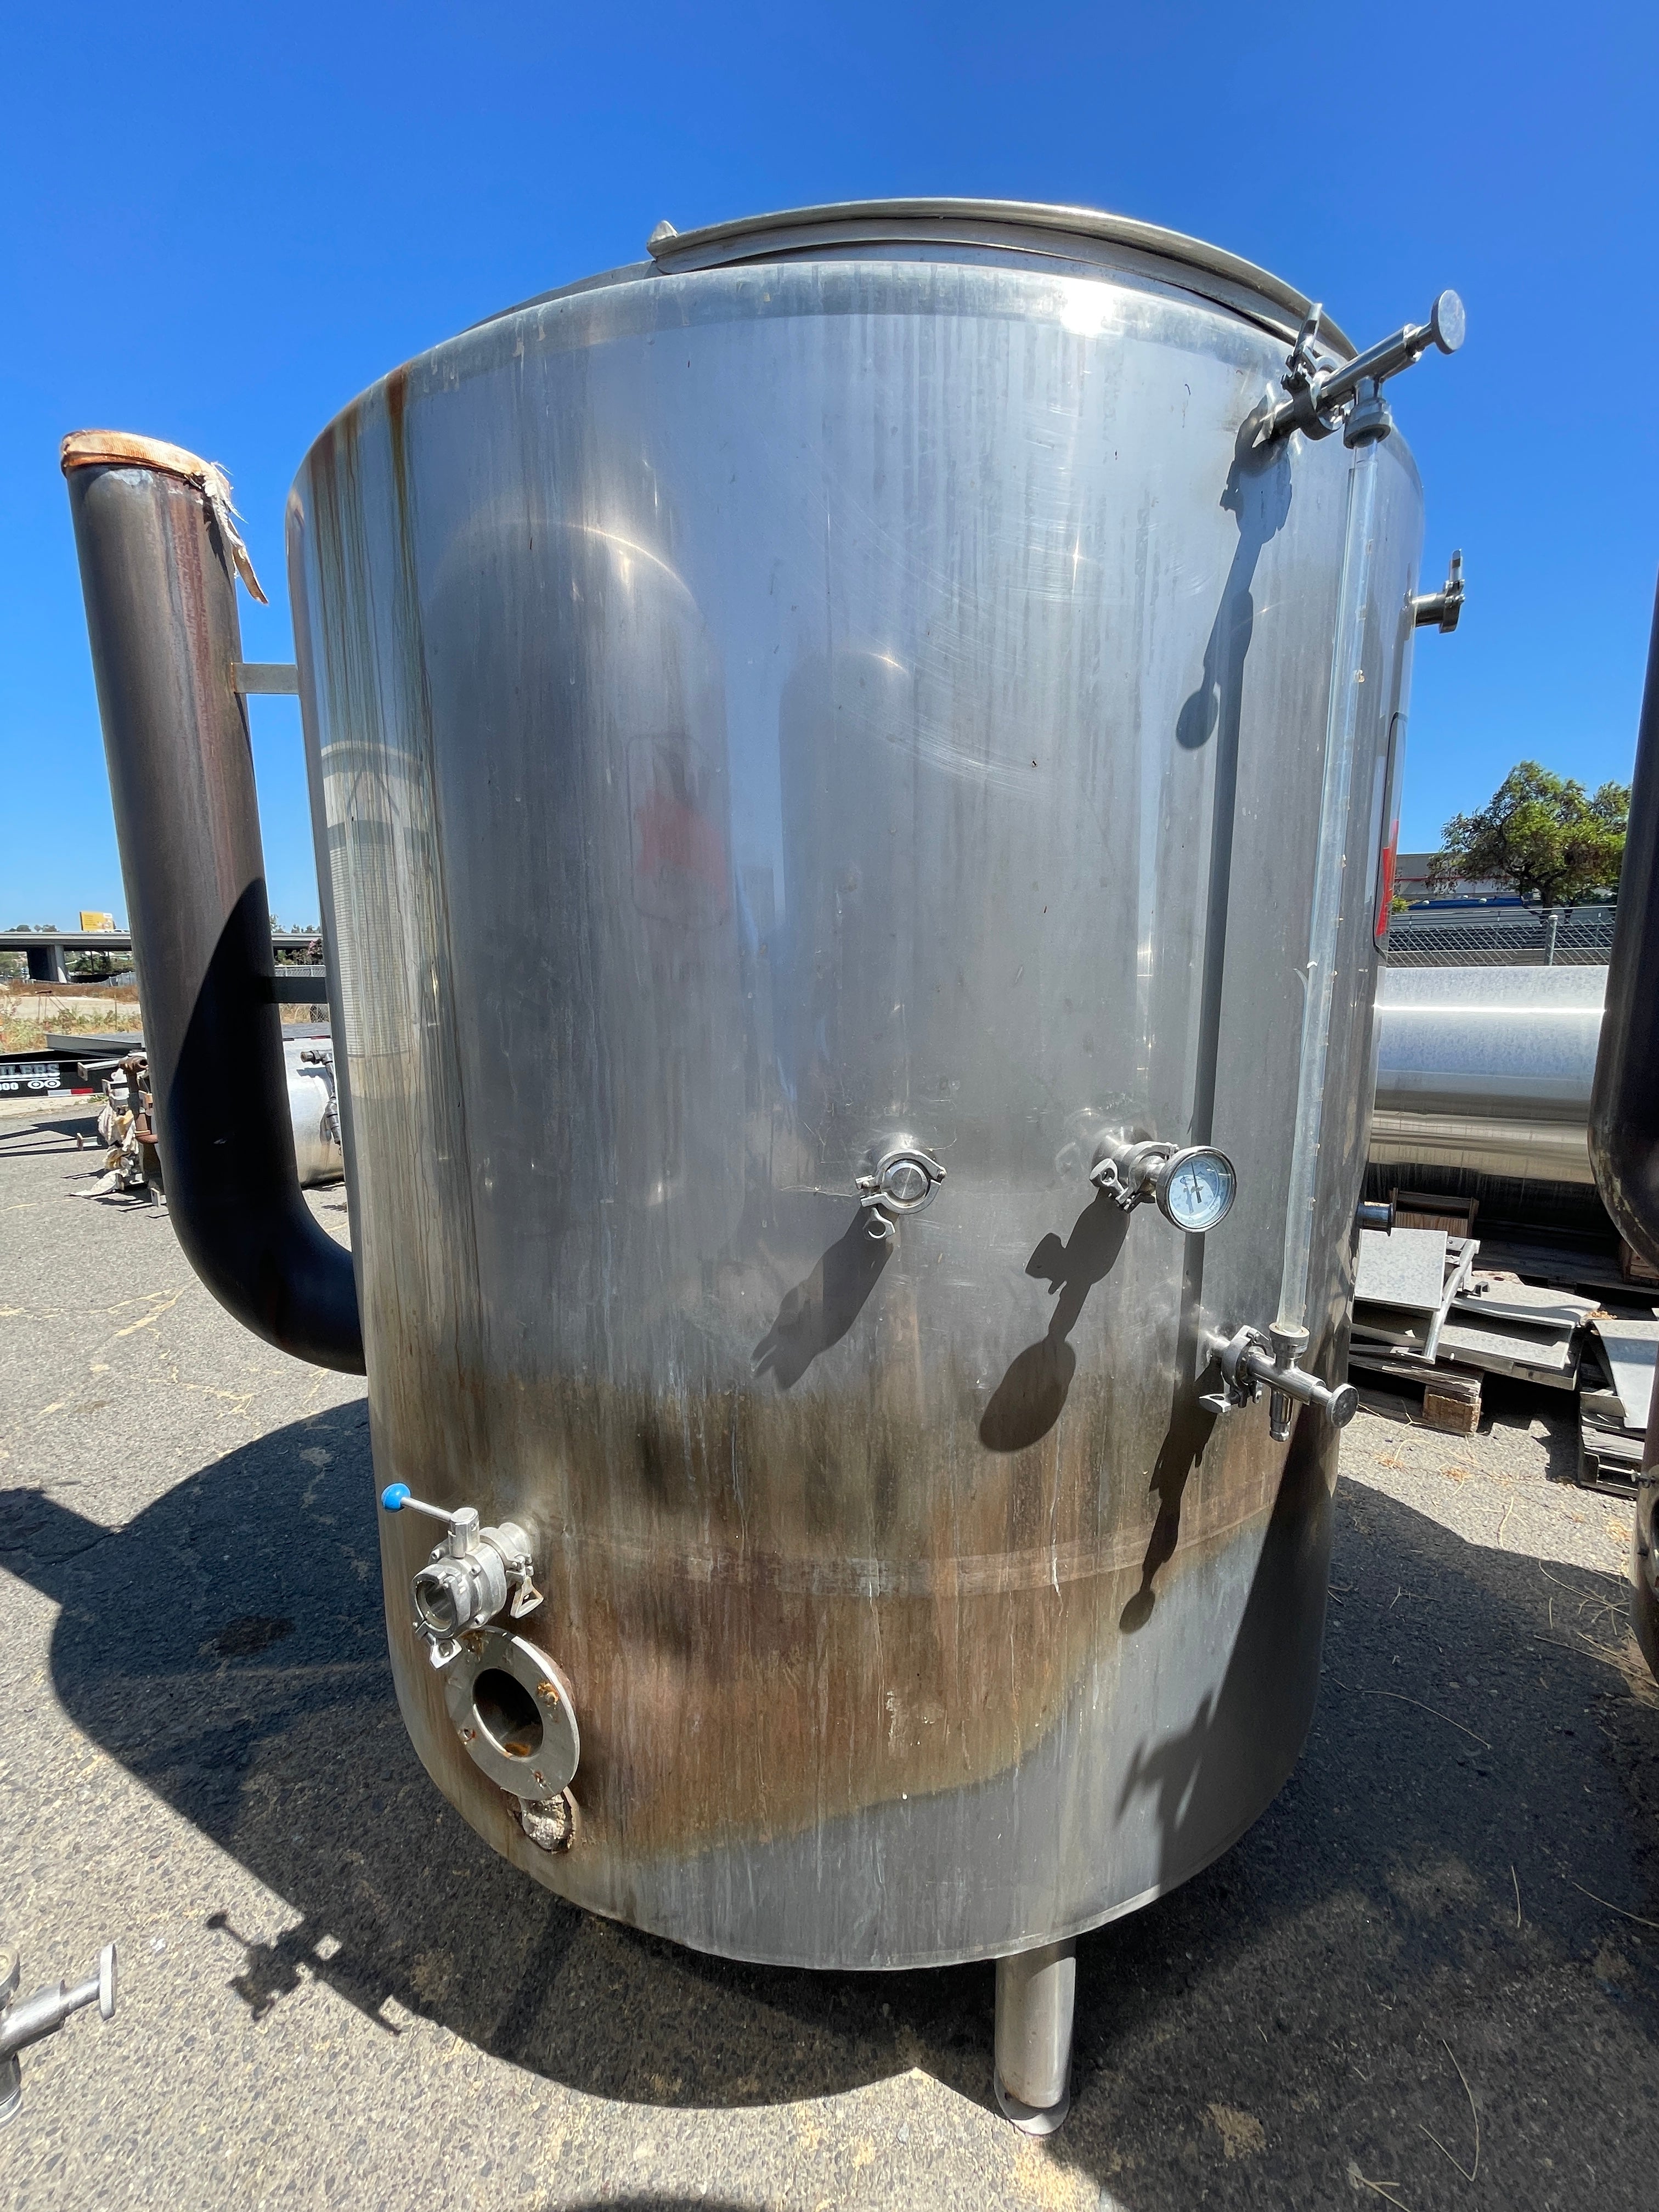 7 BBL Brew Kettle - with Heat Shields, Sloped Bottom (Direct Fire)